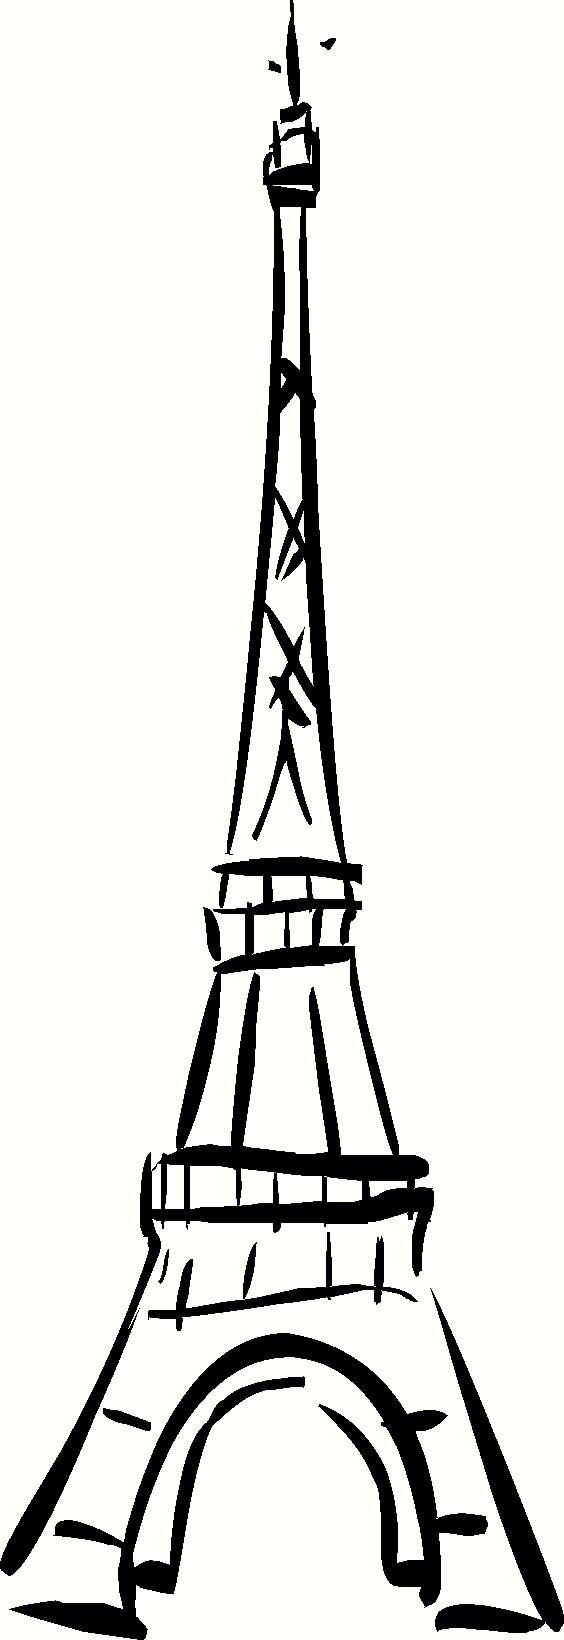 Eiffel Tower Clipart Black And White | Free download on ClipArtMag